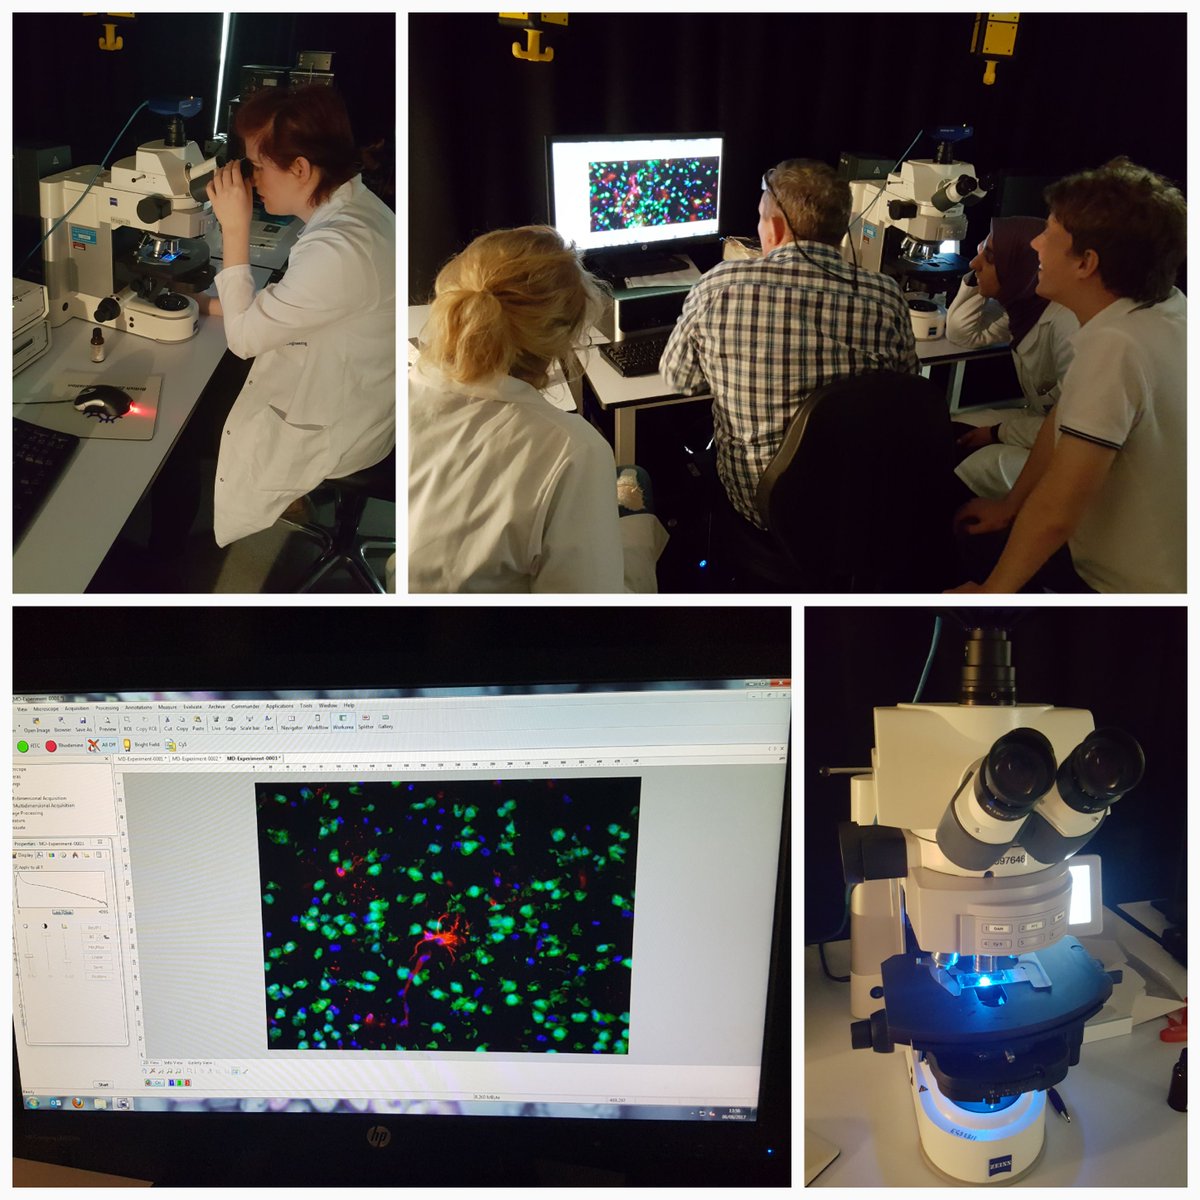 Highlights from Neuroscience Skills Workshop Day 2 ✅Fluorescent staining finished ✅Started IHC staining TBC @MMUEngage #MMU_SciEngAward